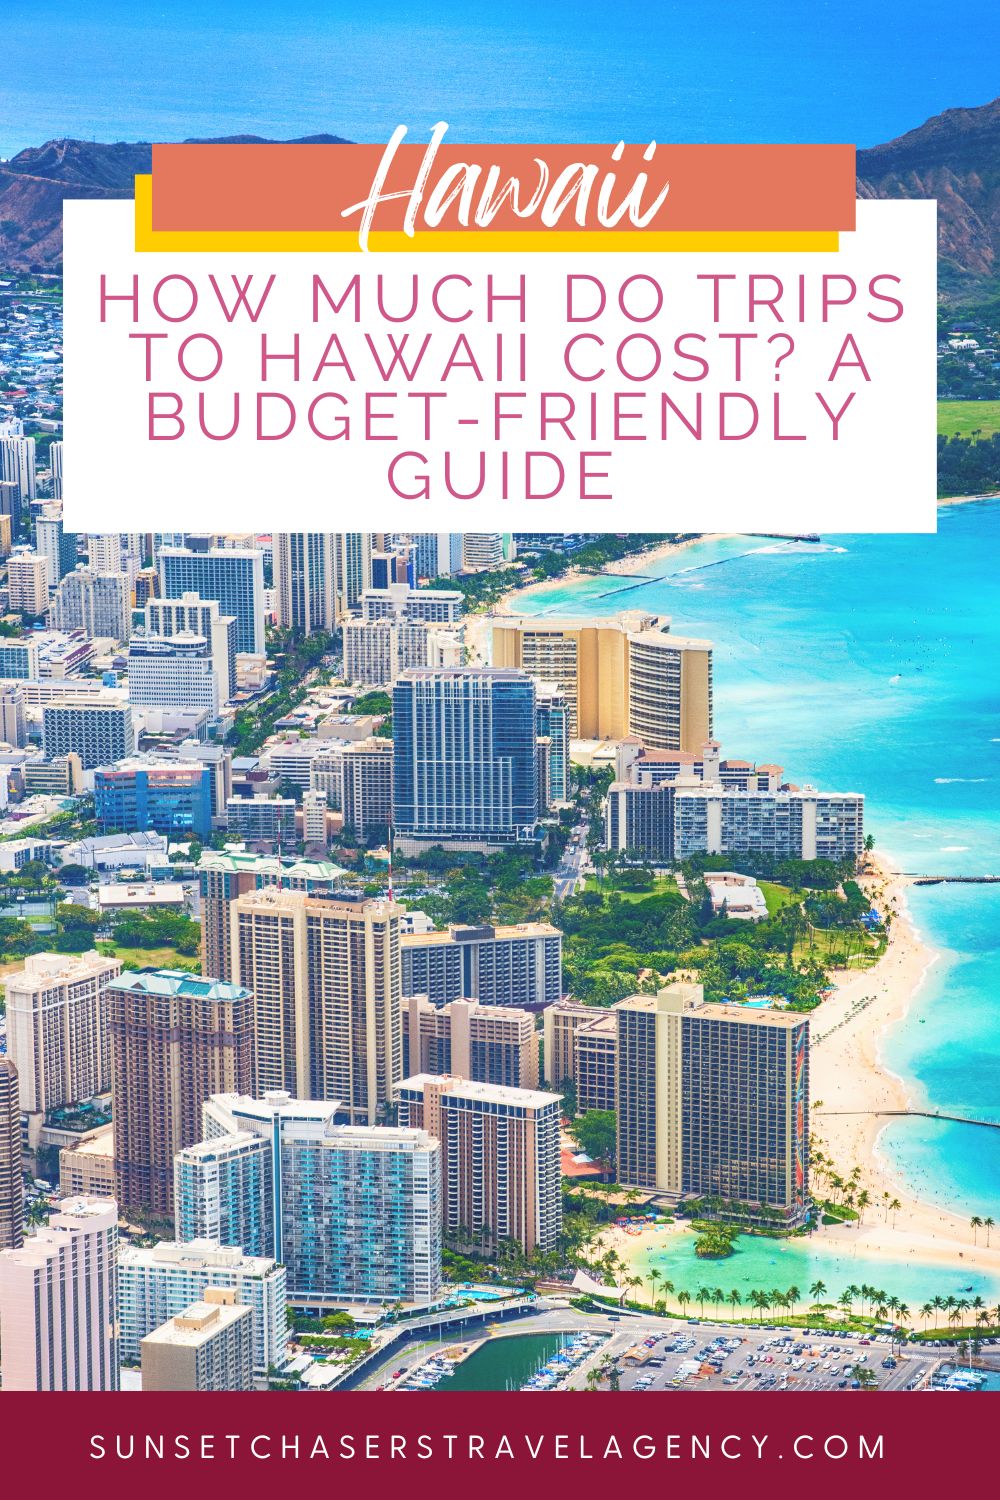 How Much Do Trips to Hawaii Cost? A BudgetFriendly Guide